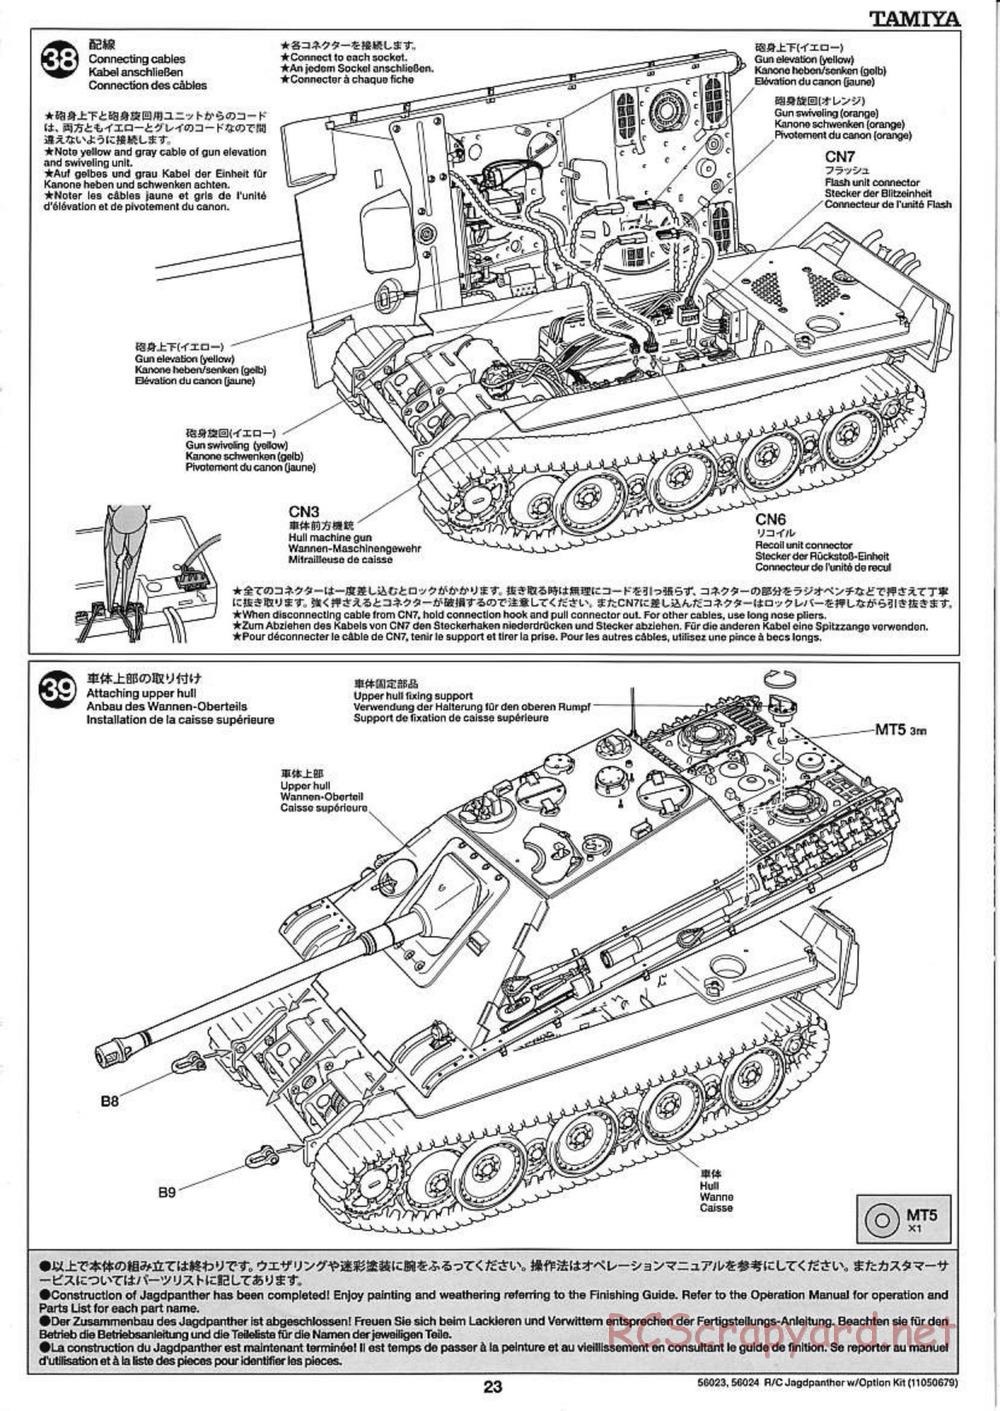 Tamiya - Jagdpanther - 1/16 Scale Chassis - Manual - Page 23